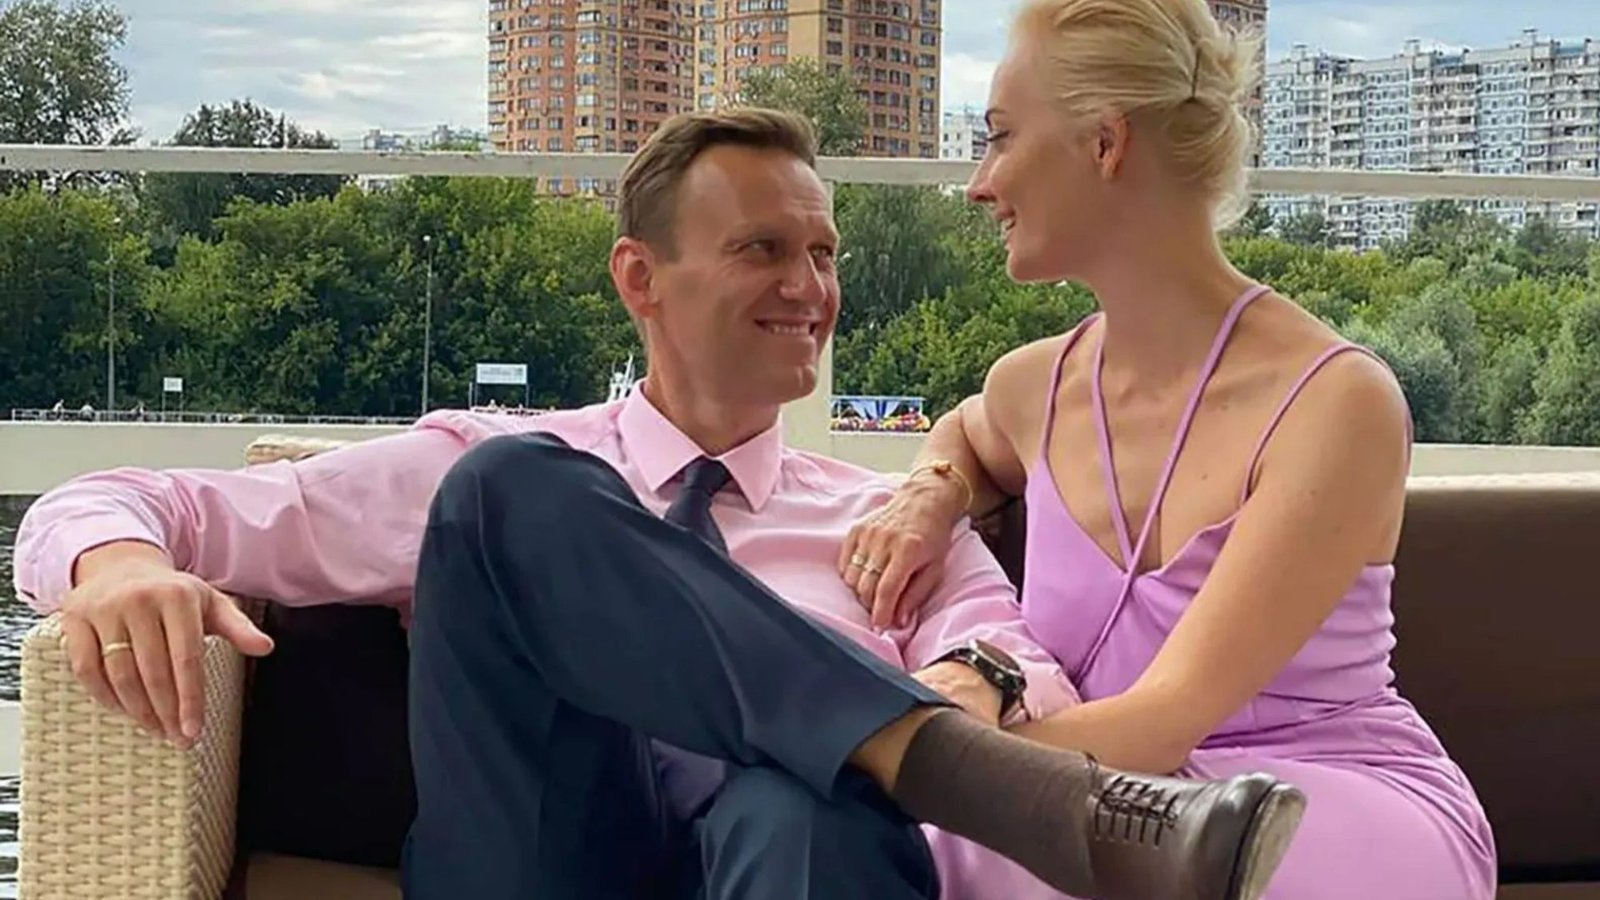 Alexei Navalny’s wife Yulia shares heartbreaking photograph and poignant message following his death in jail